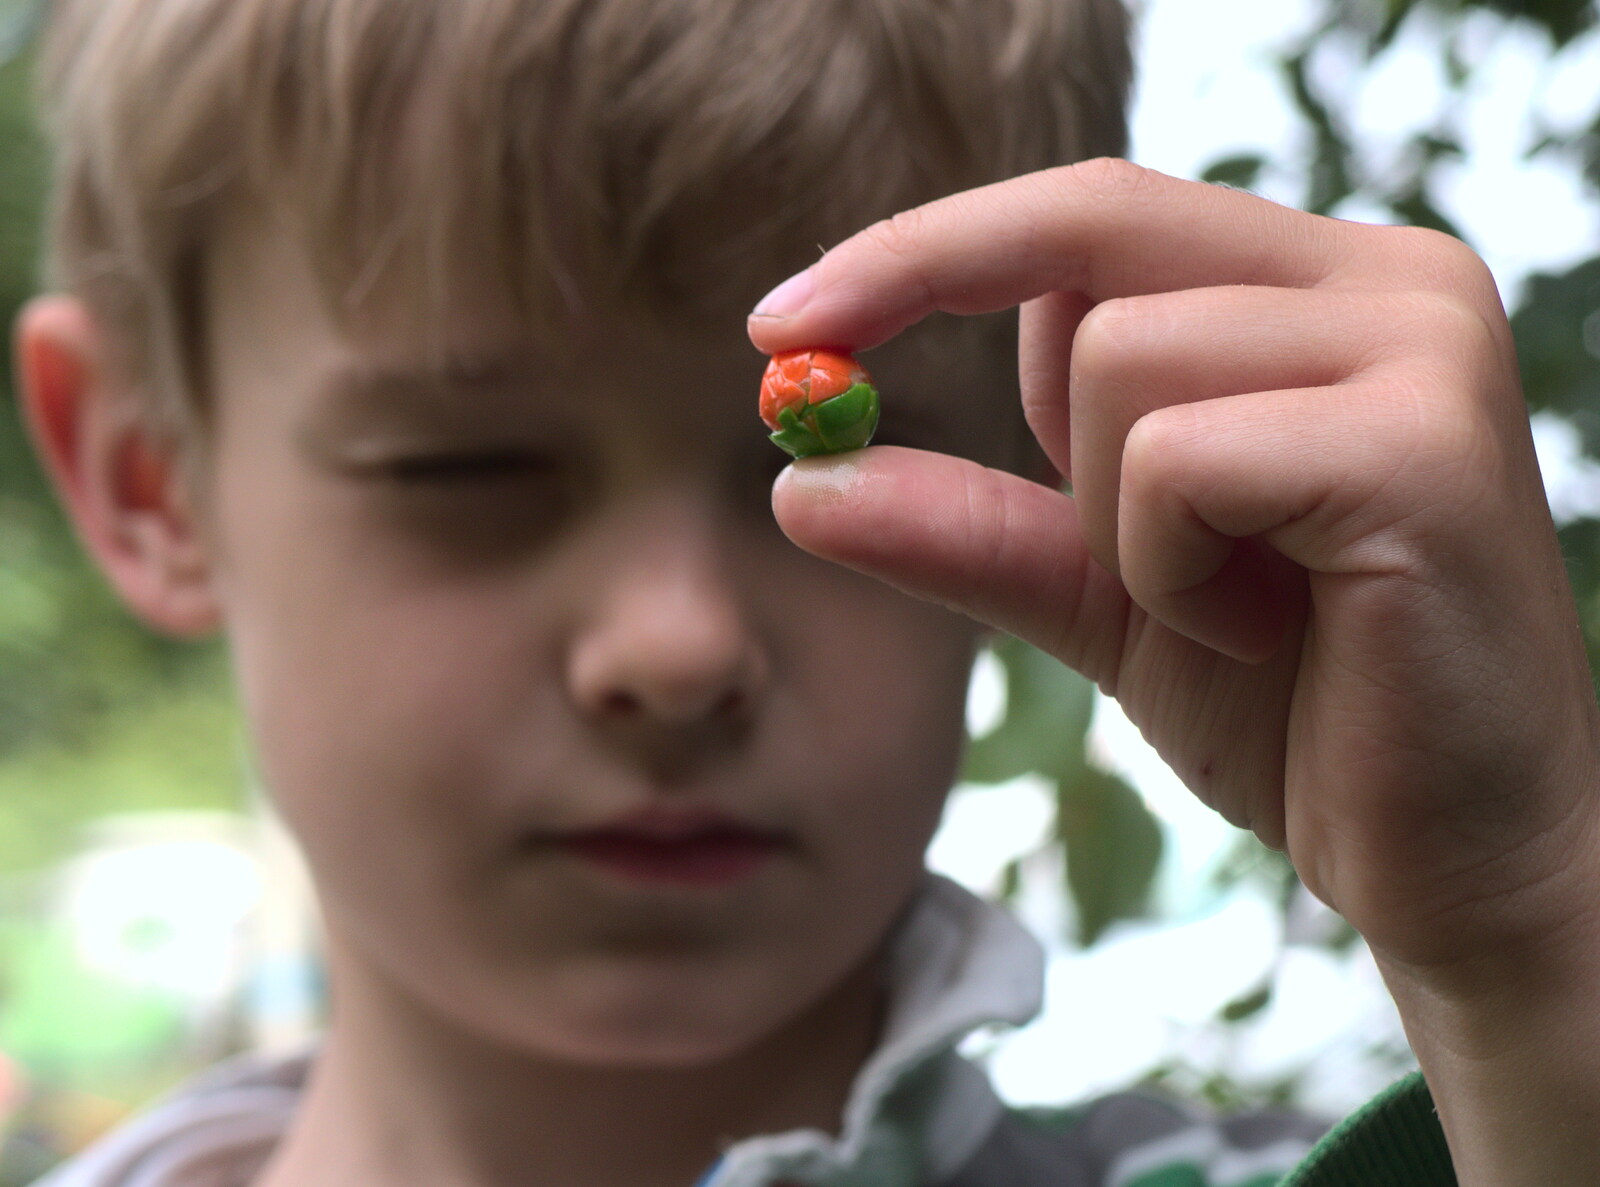 Harry makes a contruction with two Skittles from Dower House Camping, West Harling, Norfolk - 27th May 2018